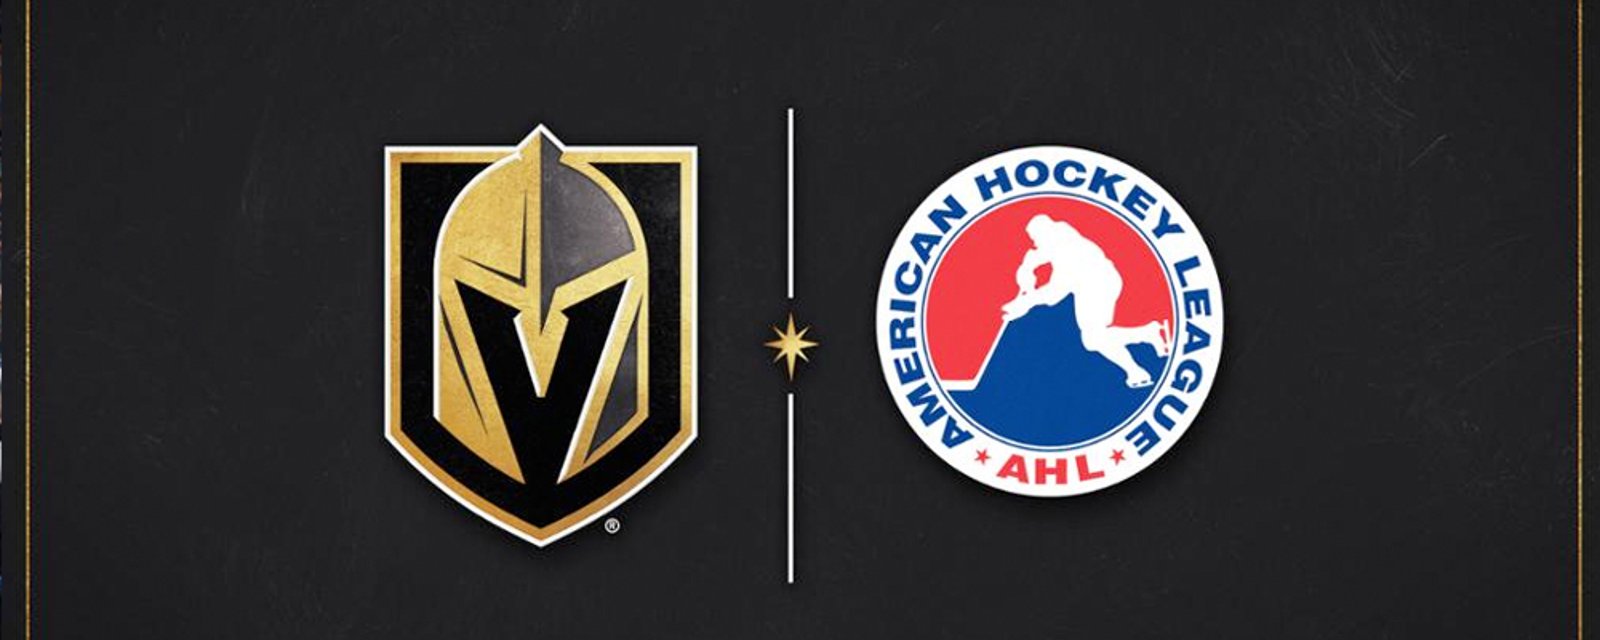 Vegas officially unveils name/logo for new AHL team to mixed reaction